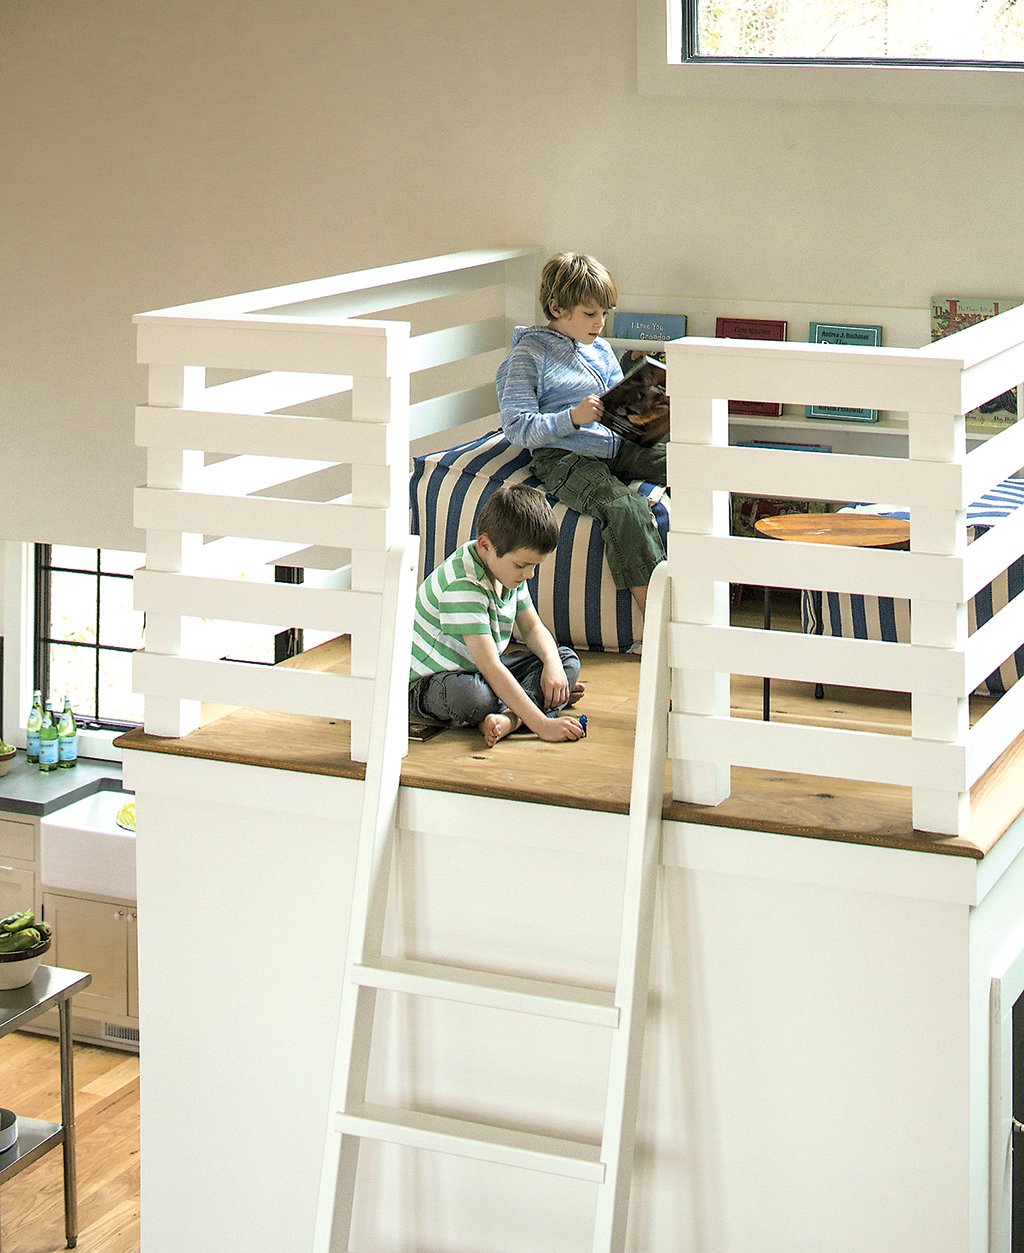 The “crow’s nest” play space Liess designed for her kids. Photograph by Helen Norman.